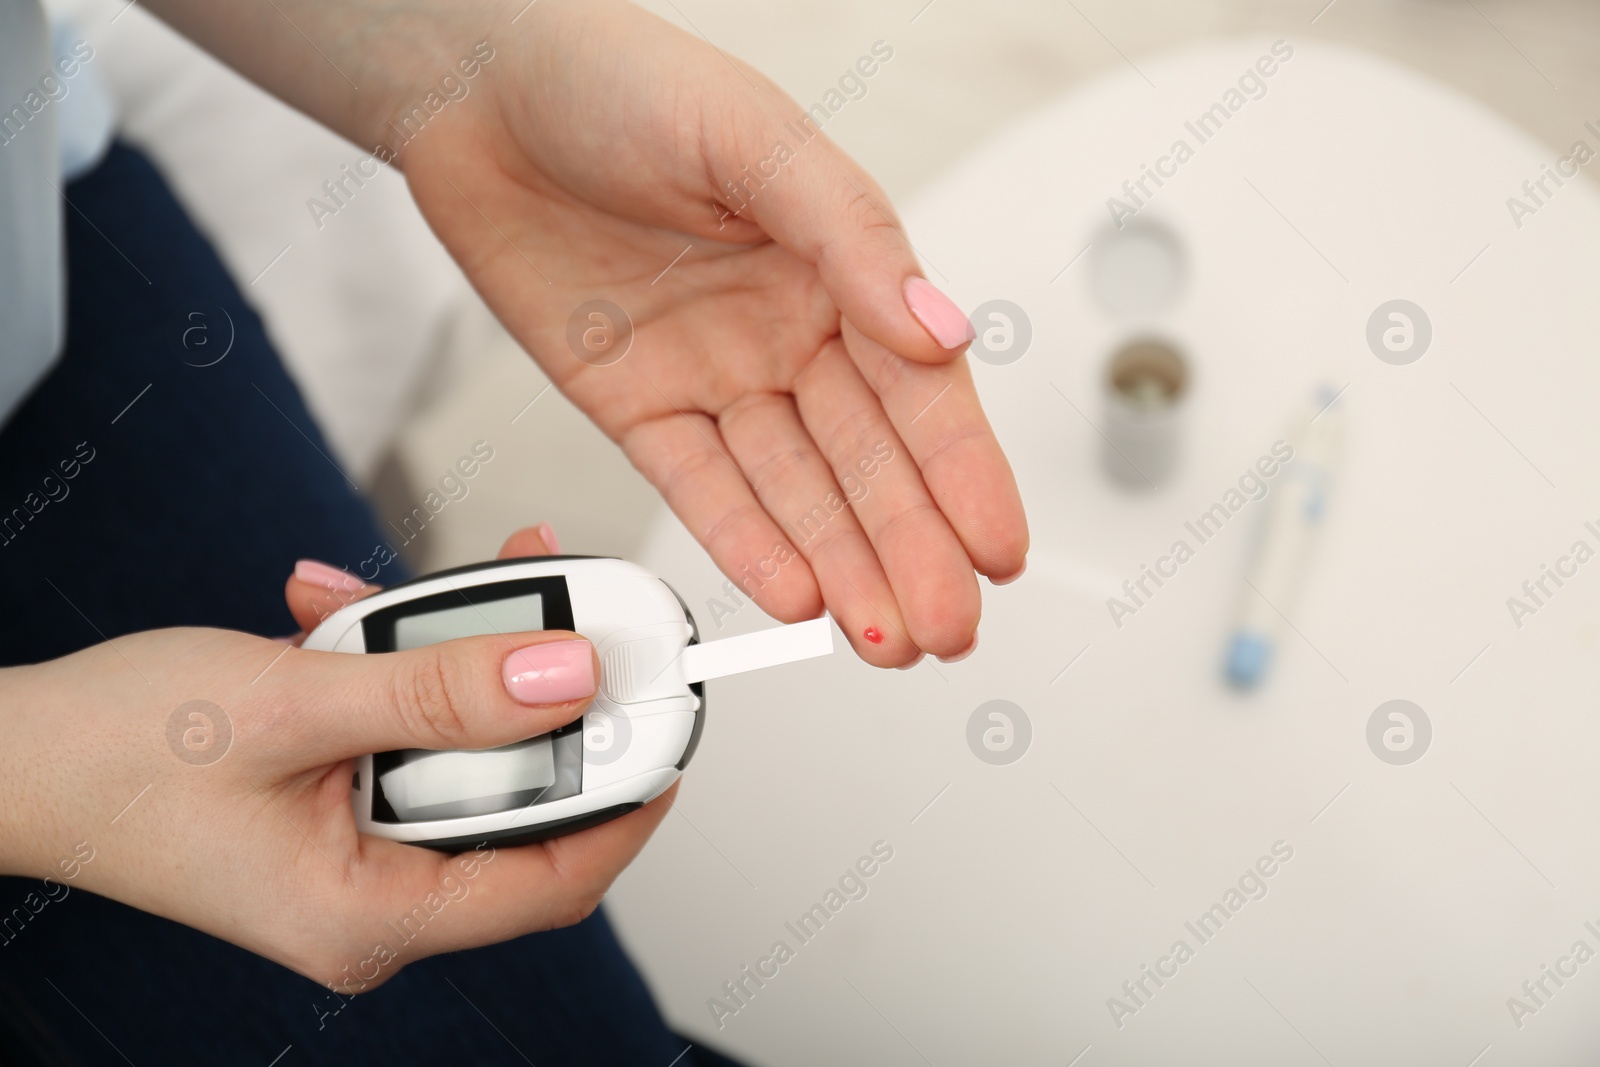 Photo of Diabetes. Woman checking blood sugar level with glucometer at home, above view